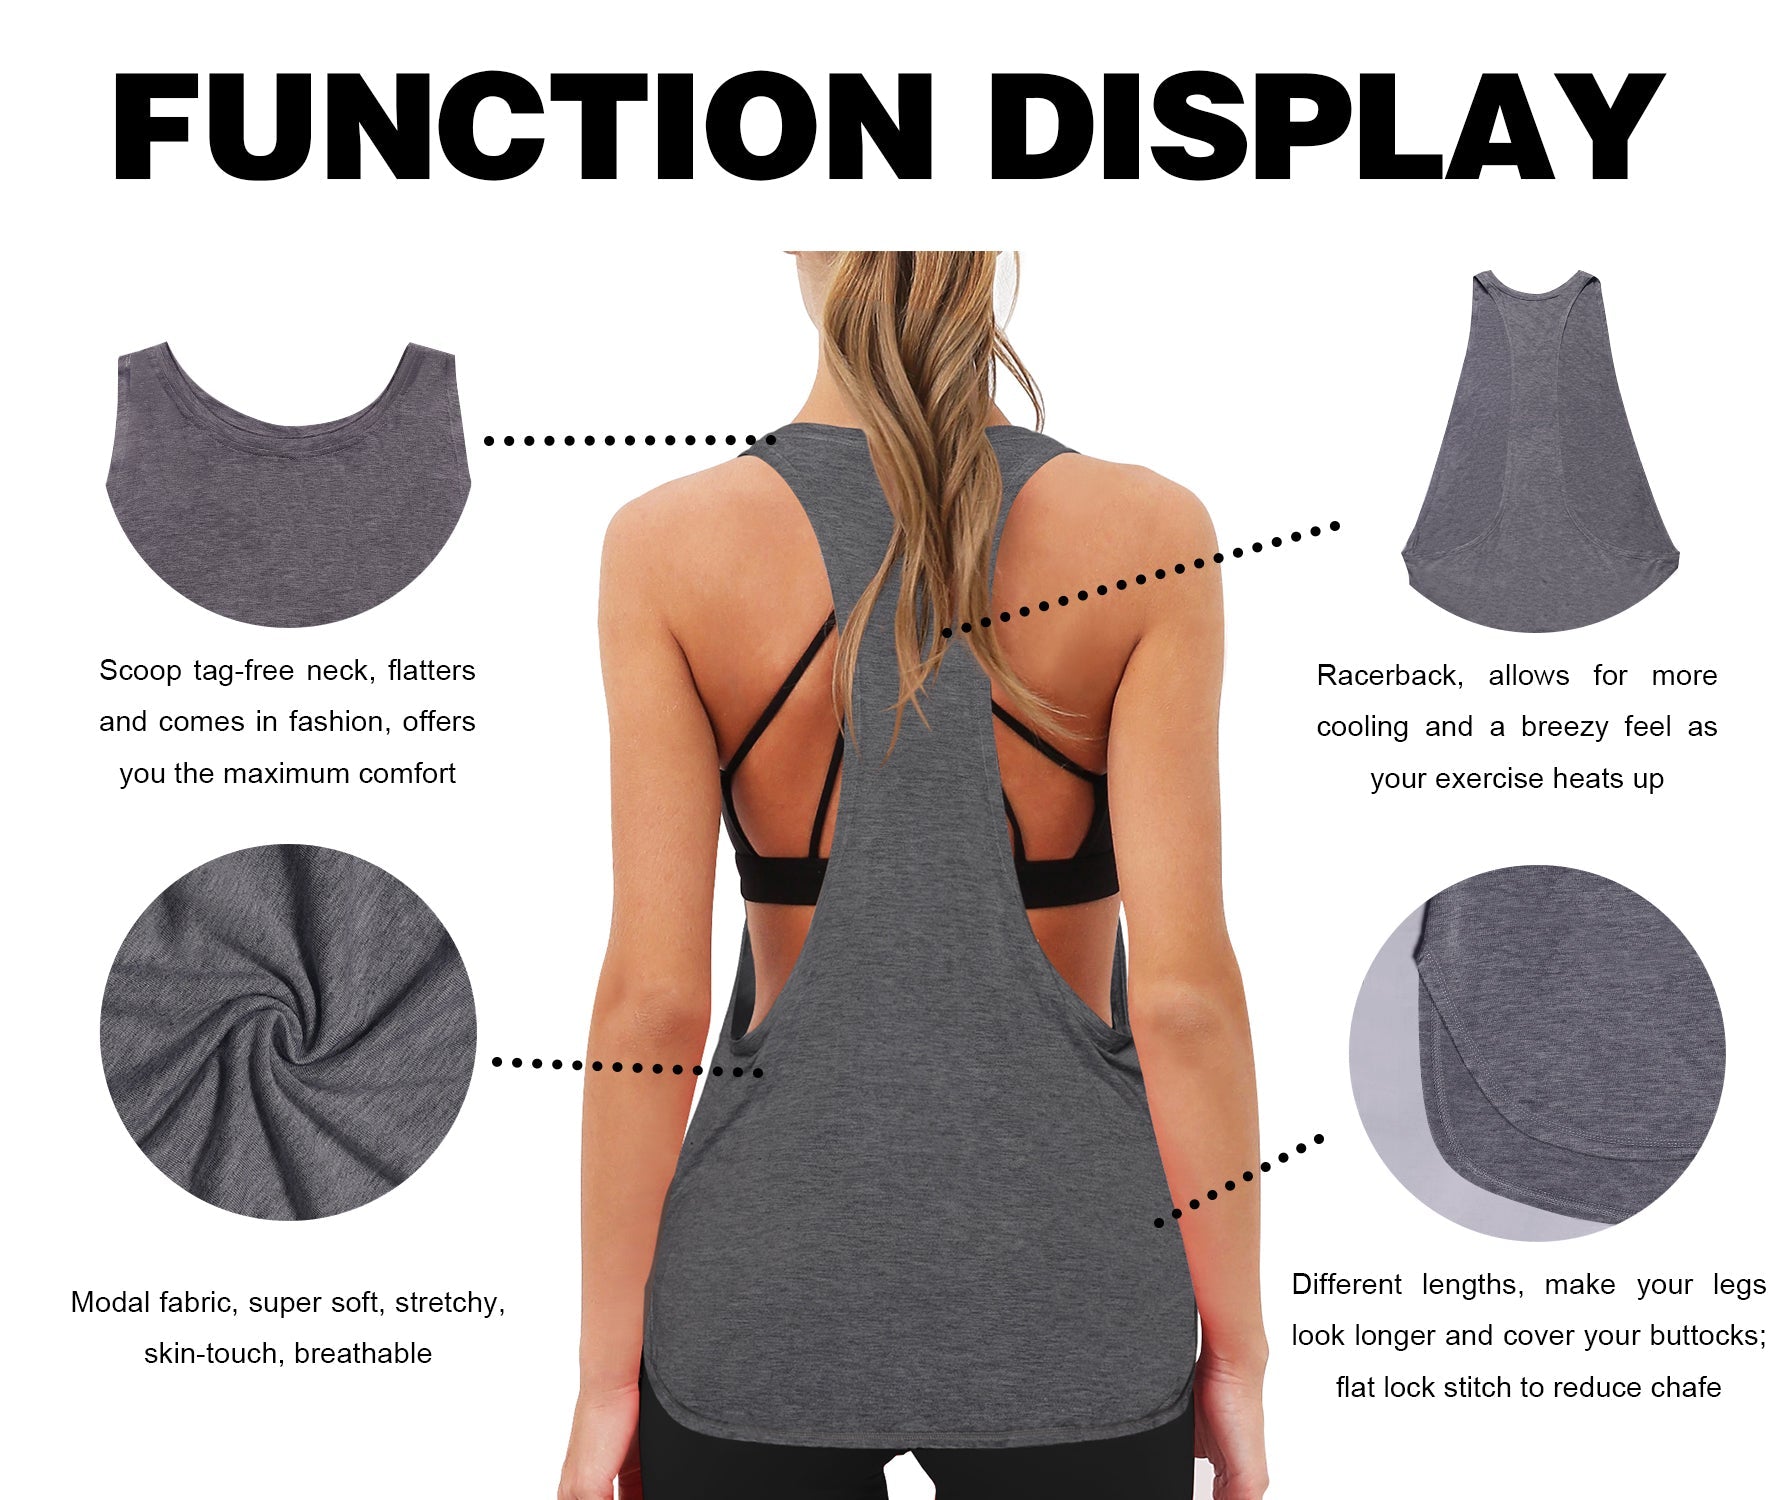 Low Cut Loose Fit Tank Top heathercharcoal Designed for On the Move Loose fit 93%Modal/7%Spandex Four-way stretch Naturally breathable Super-Soft, Modal Fabric